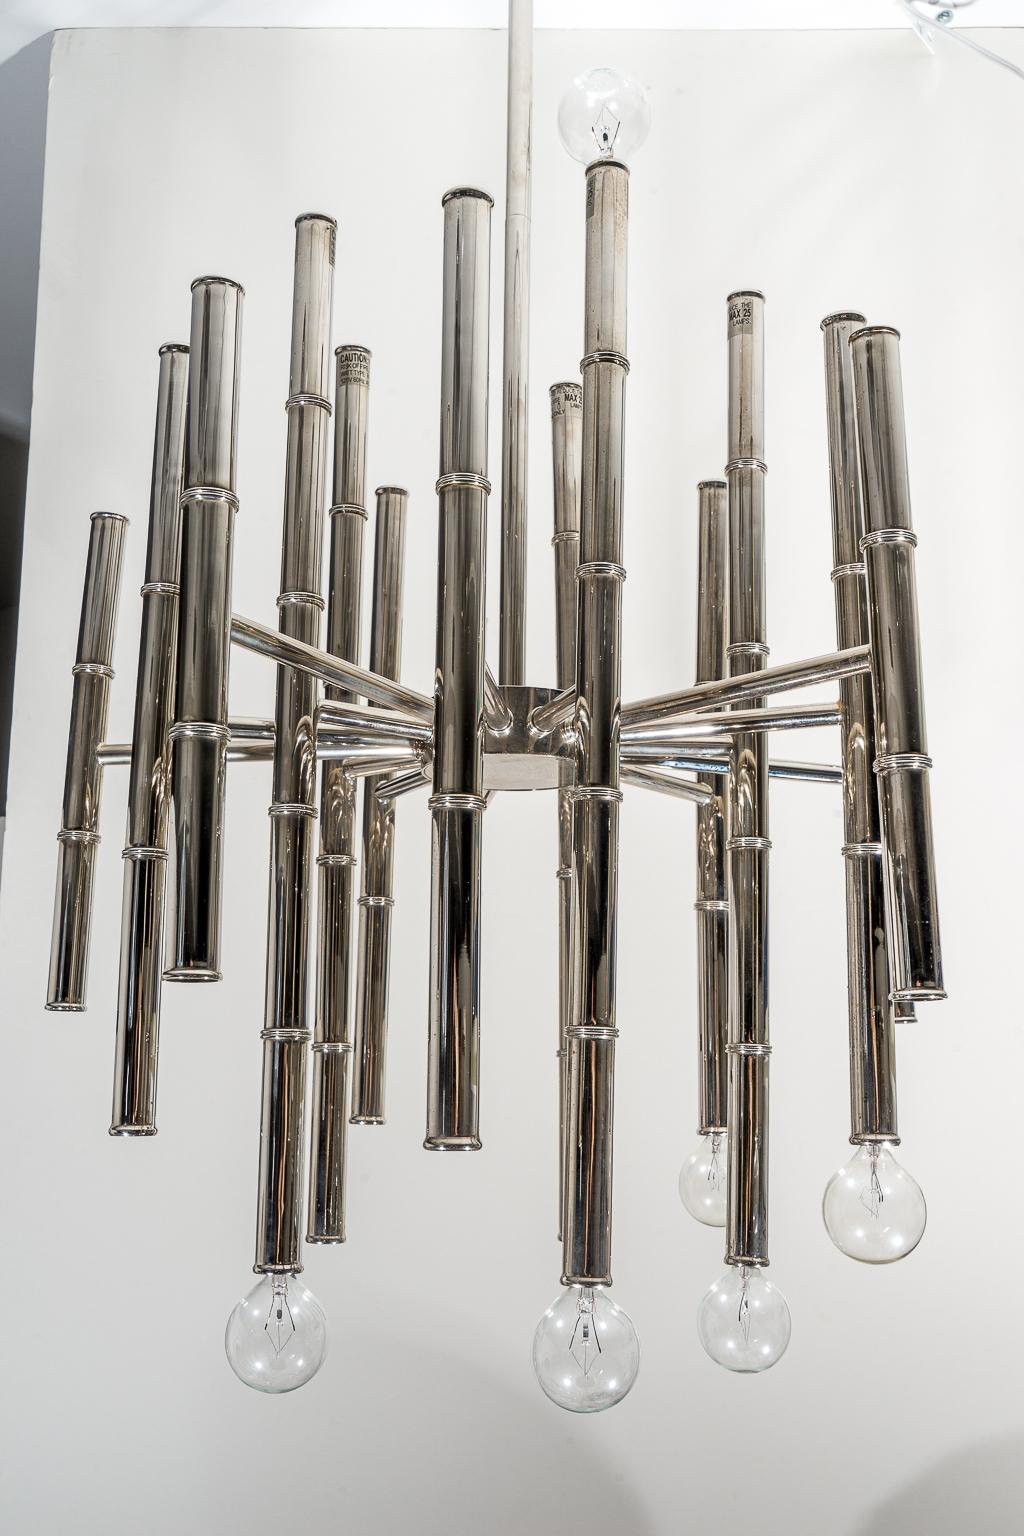 This large scale chandelier is very much in the style of pieces created by Scolari and will make a definite statement with its polished chrome faux bamboo rods. The elongated from makes it perfect for a stairwell.

Note: The main body measures 22